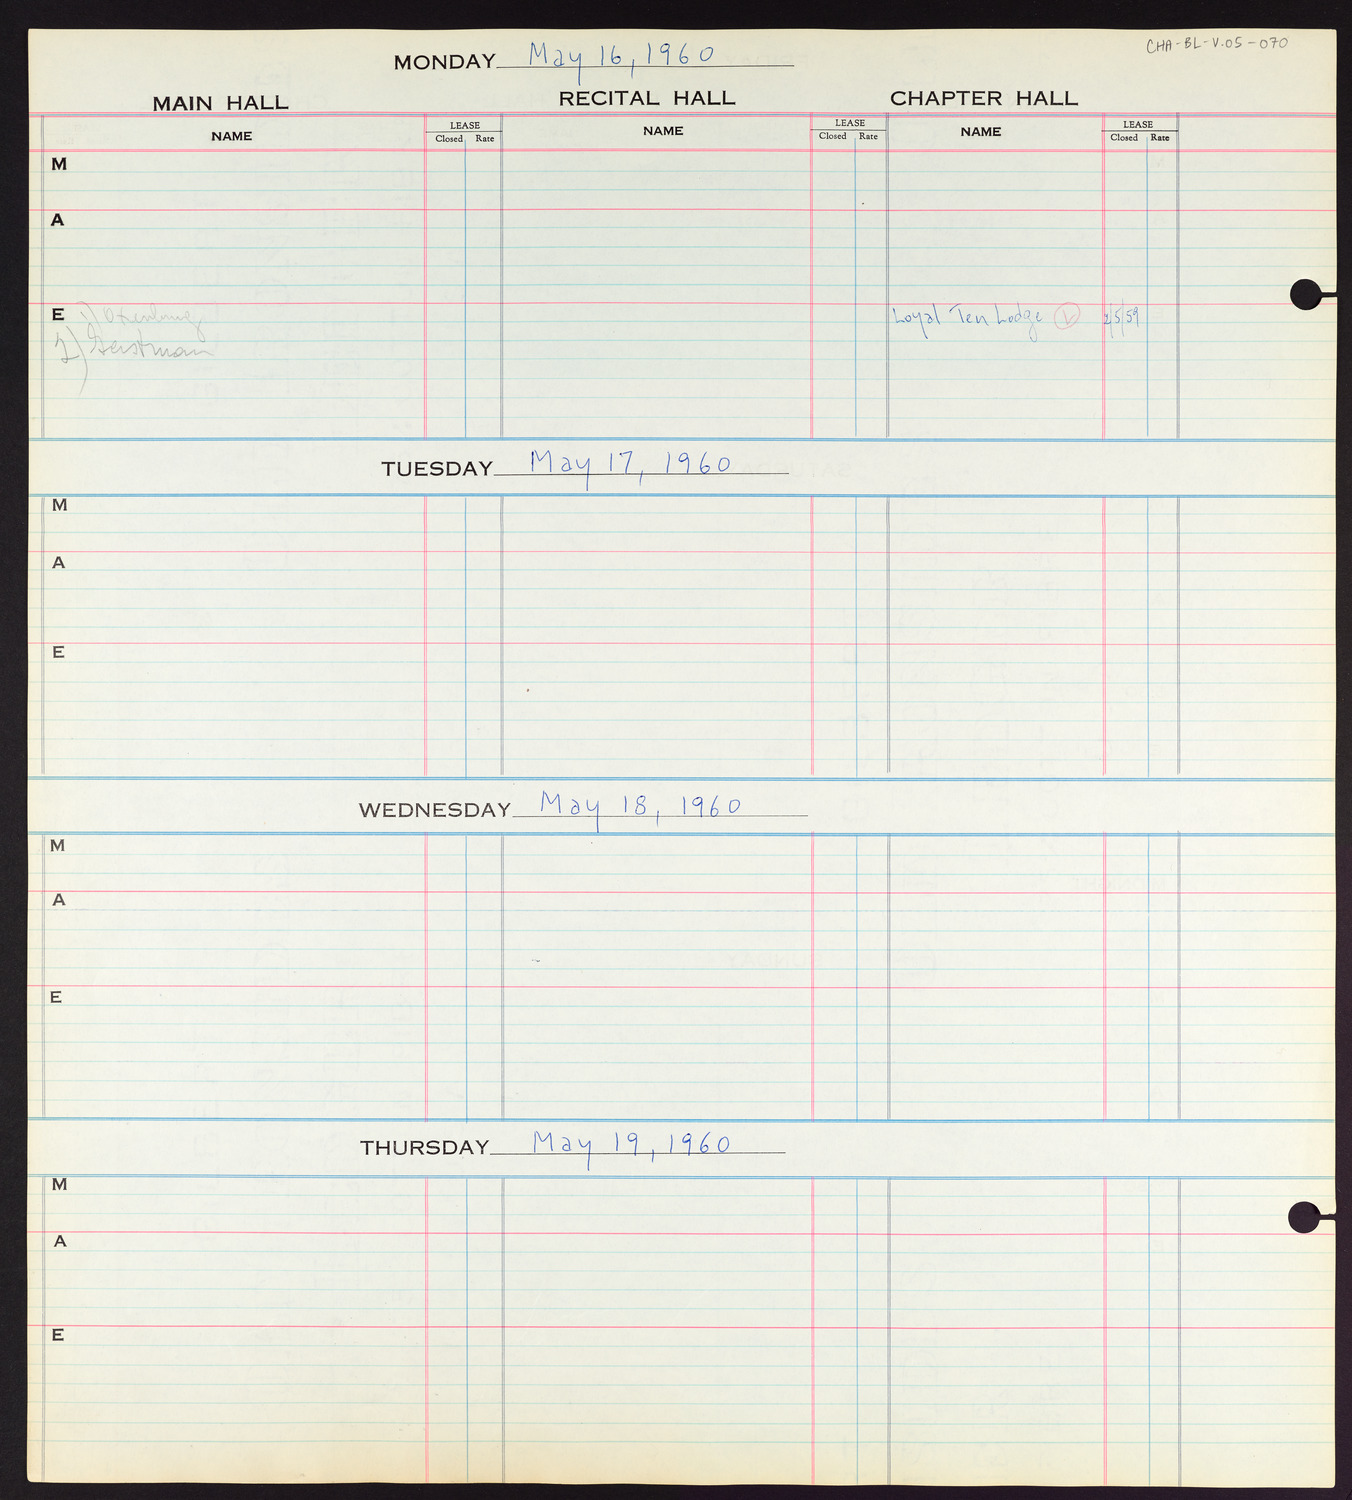 Carnegie Hall Booking Ledger, volume 5, page 70